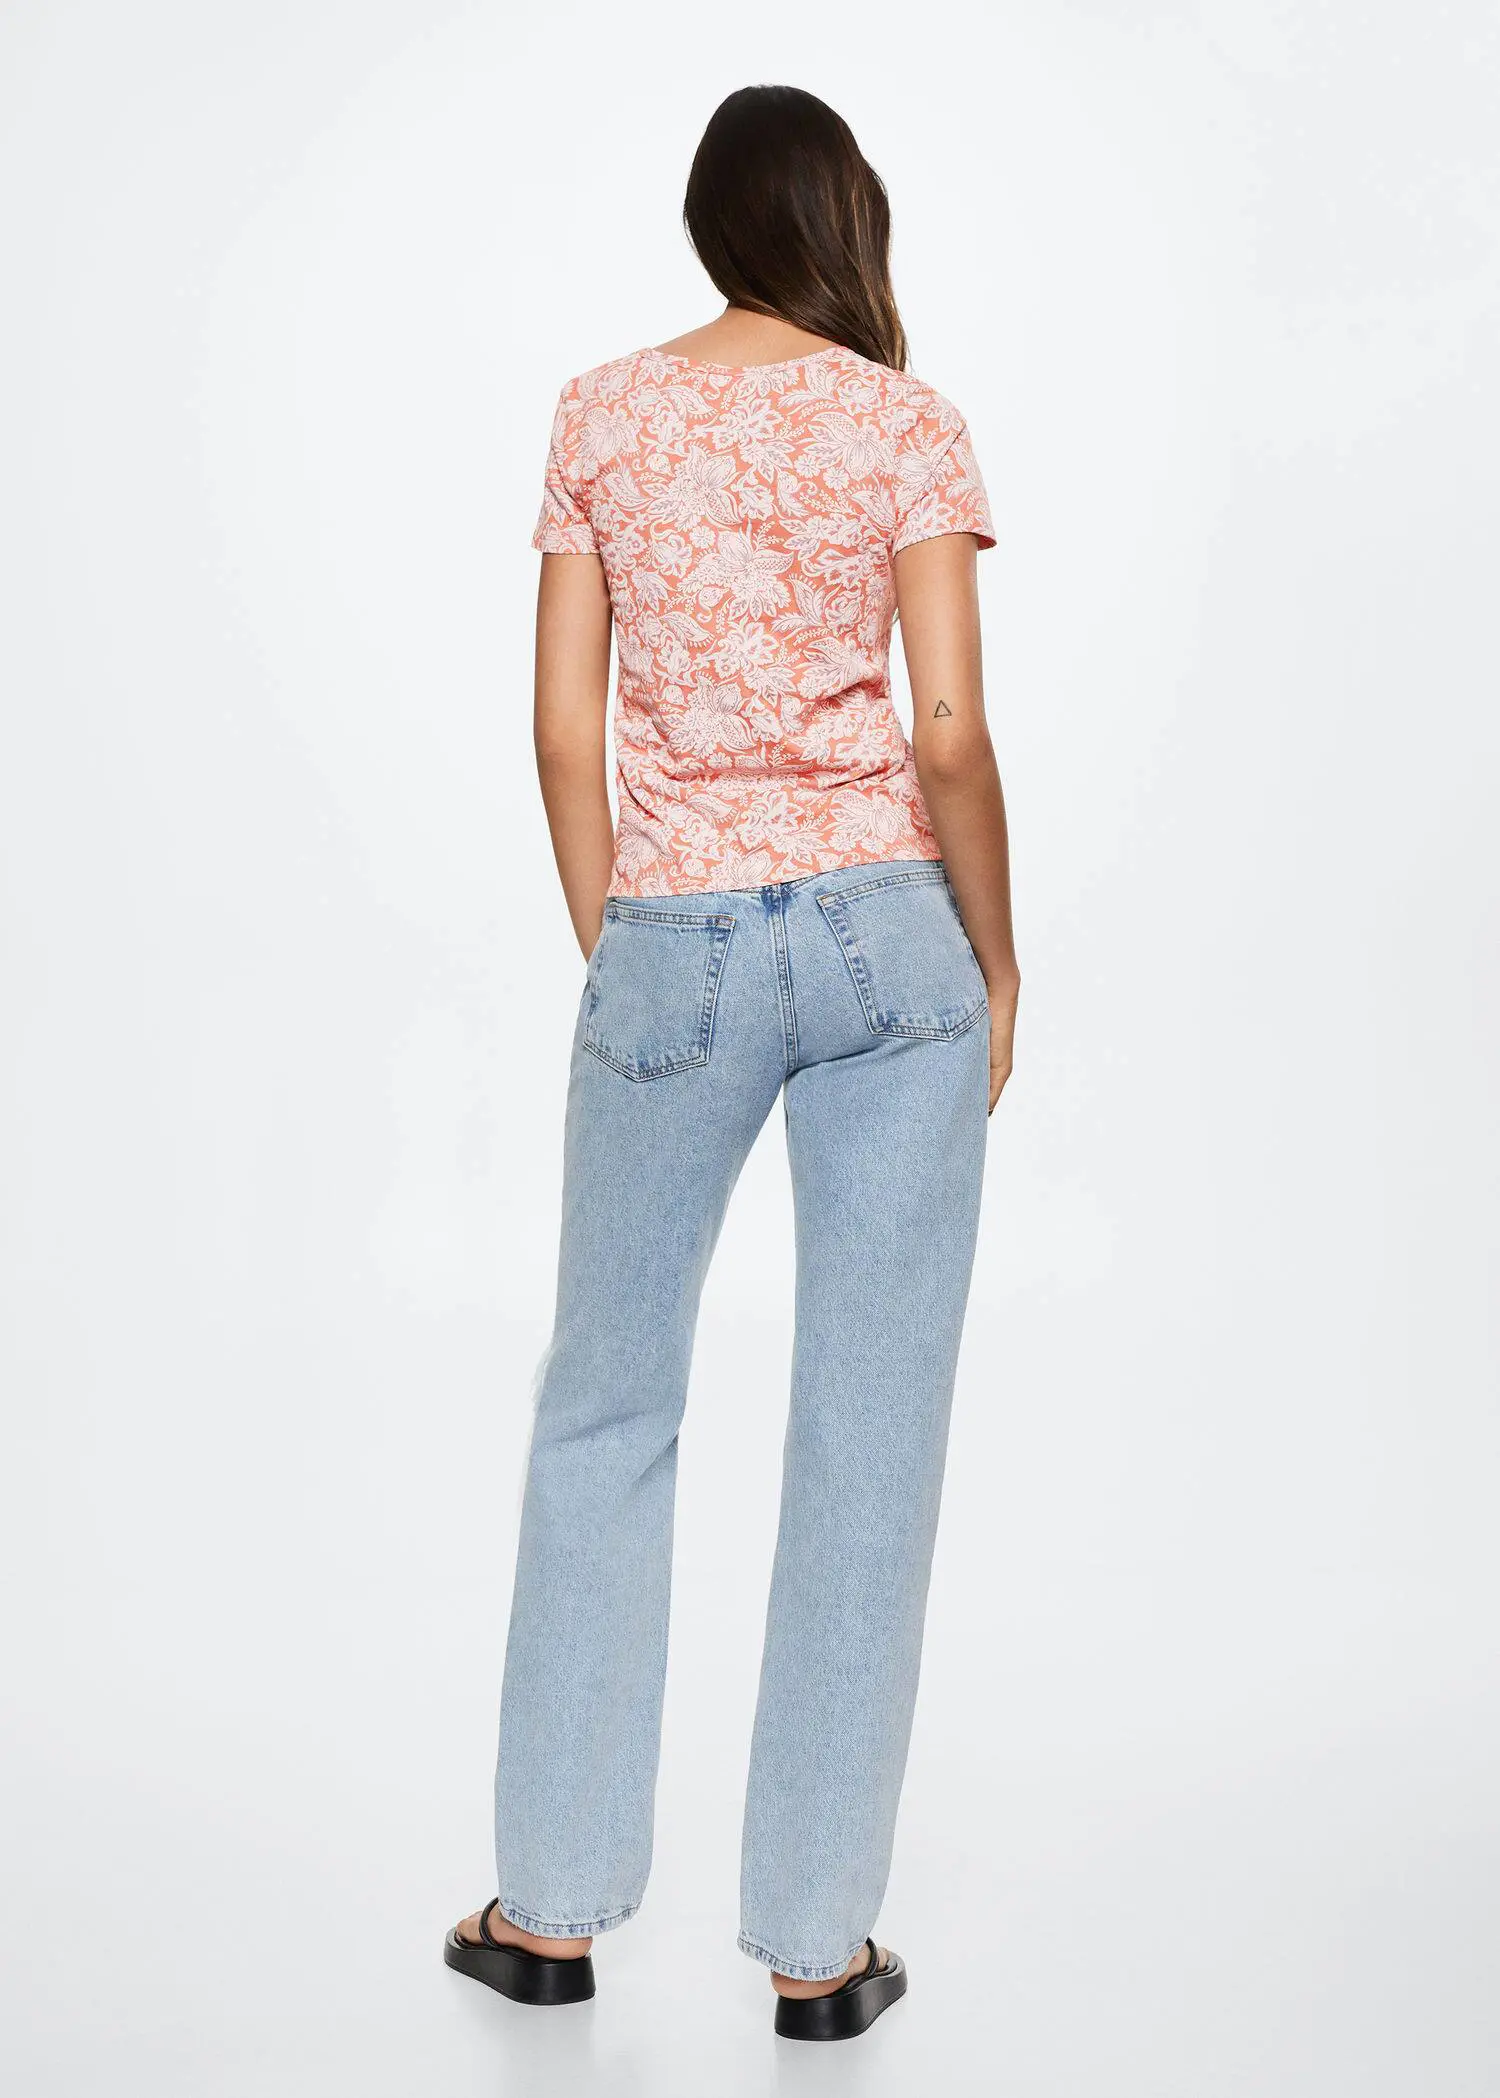 Mango Printed cotton-blend T-shirt. a woman wearing a pink floral shirt and blue jeans. 